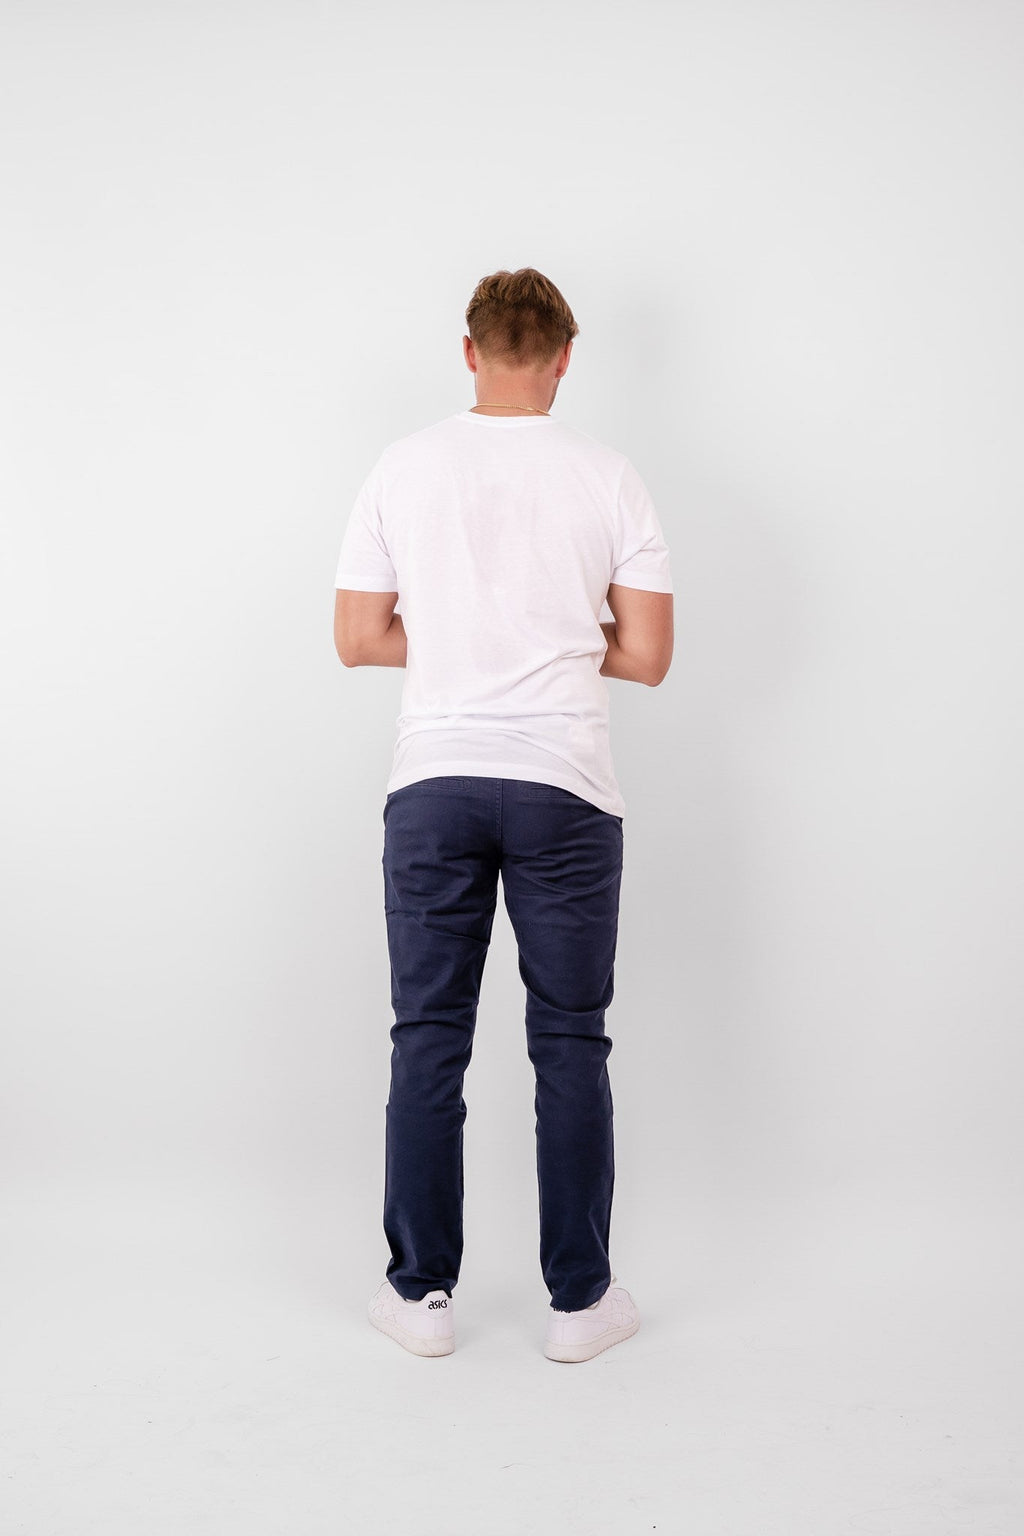 The Original Performance Structure Pants (Rialta) - Navy